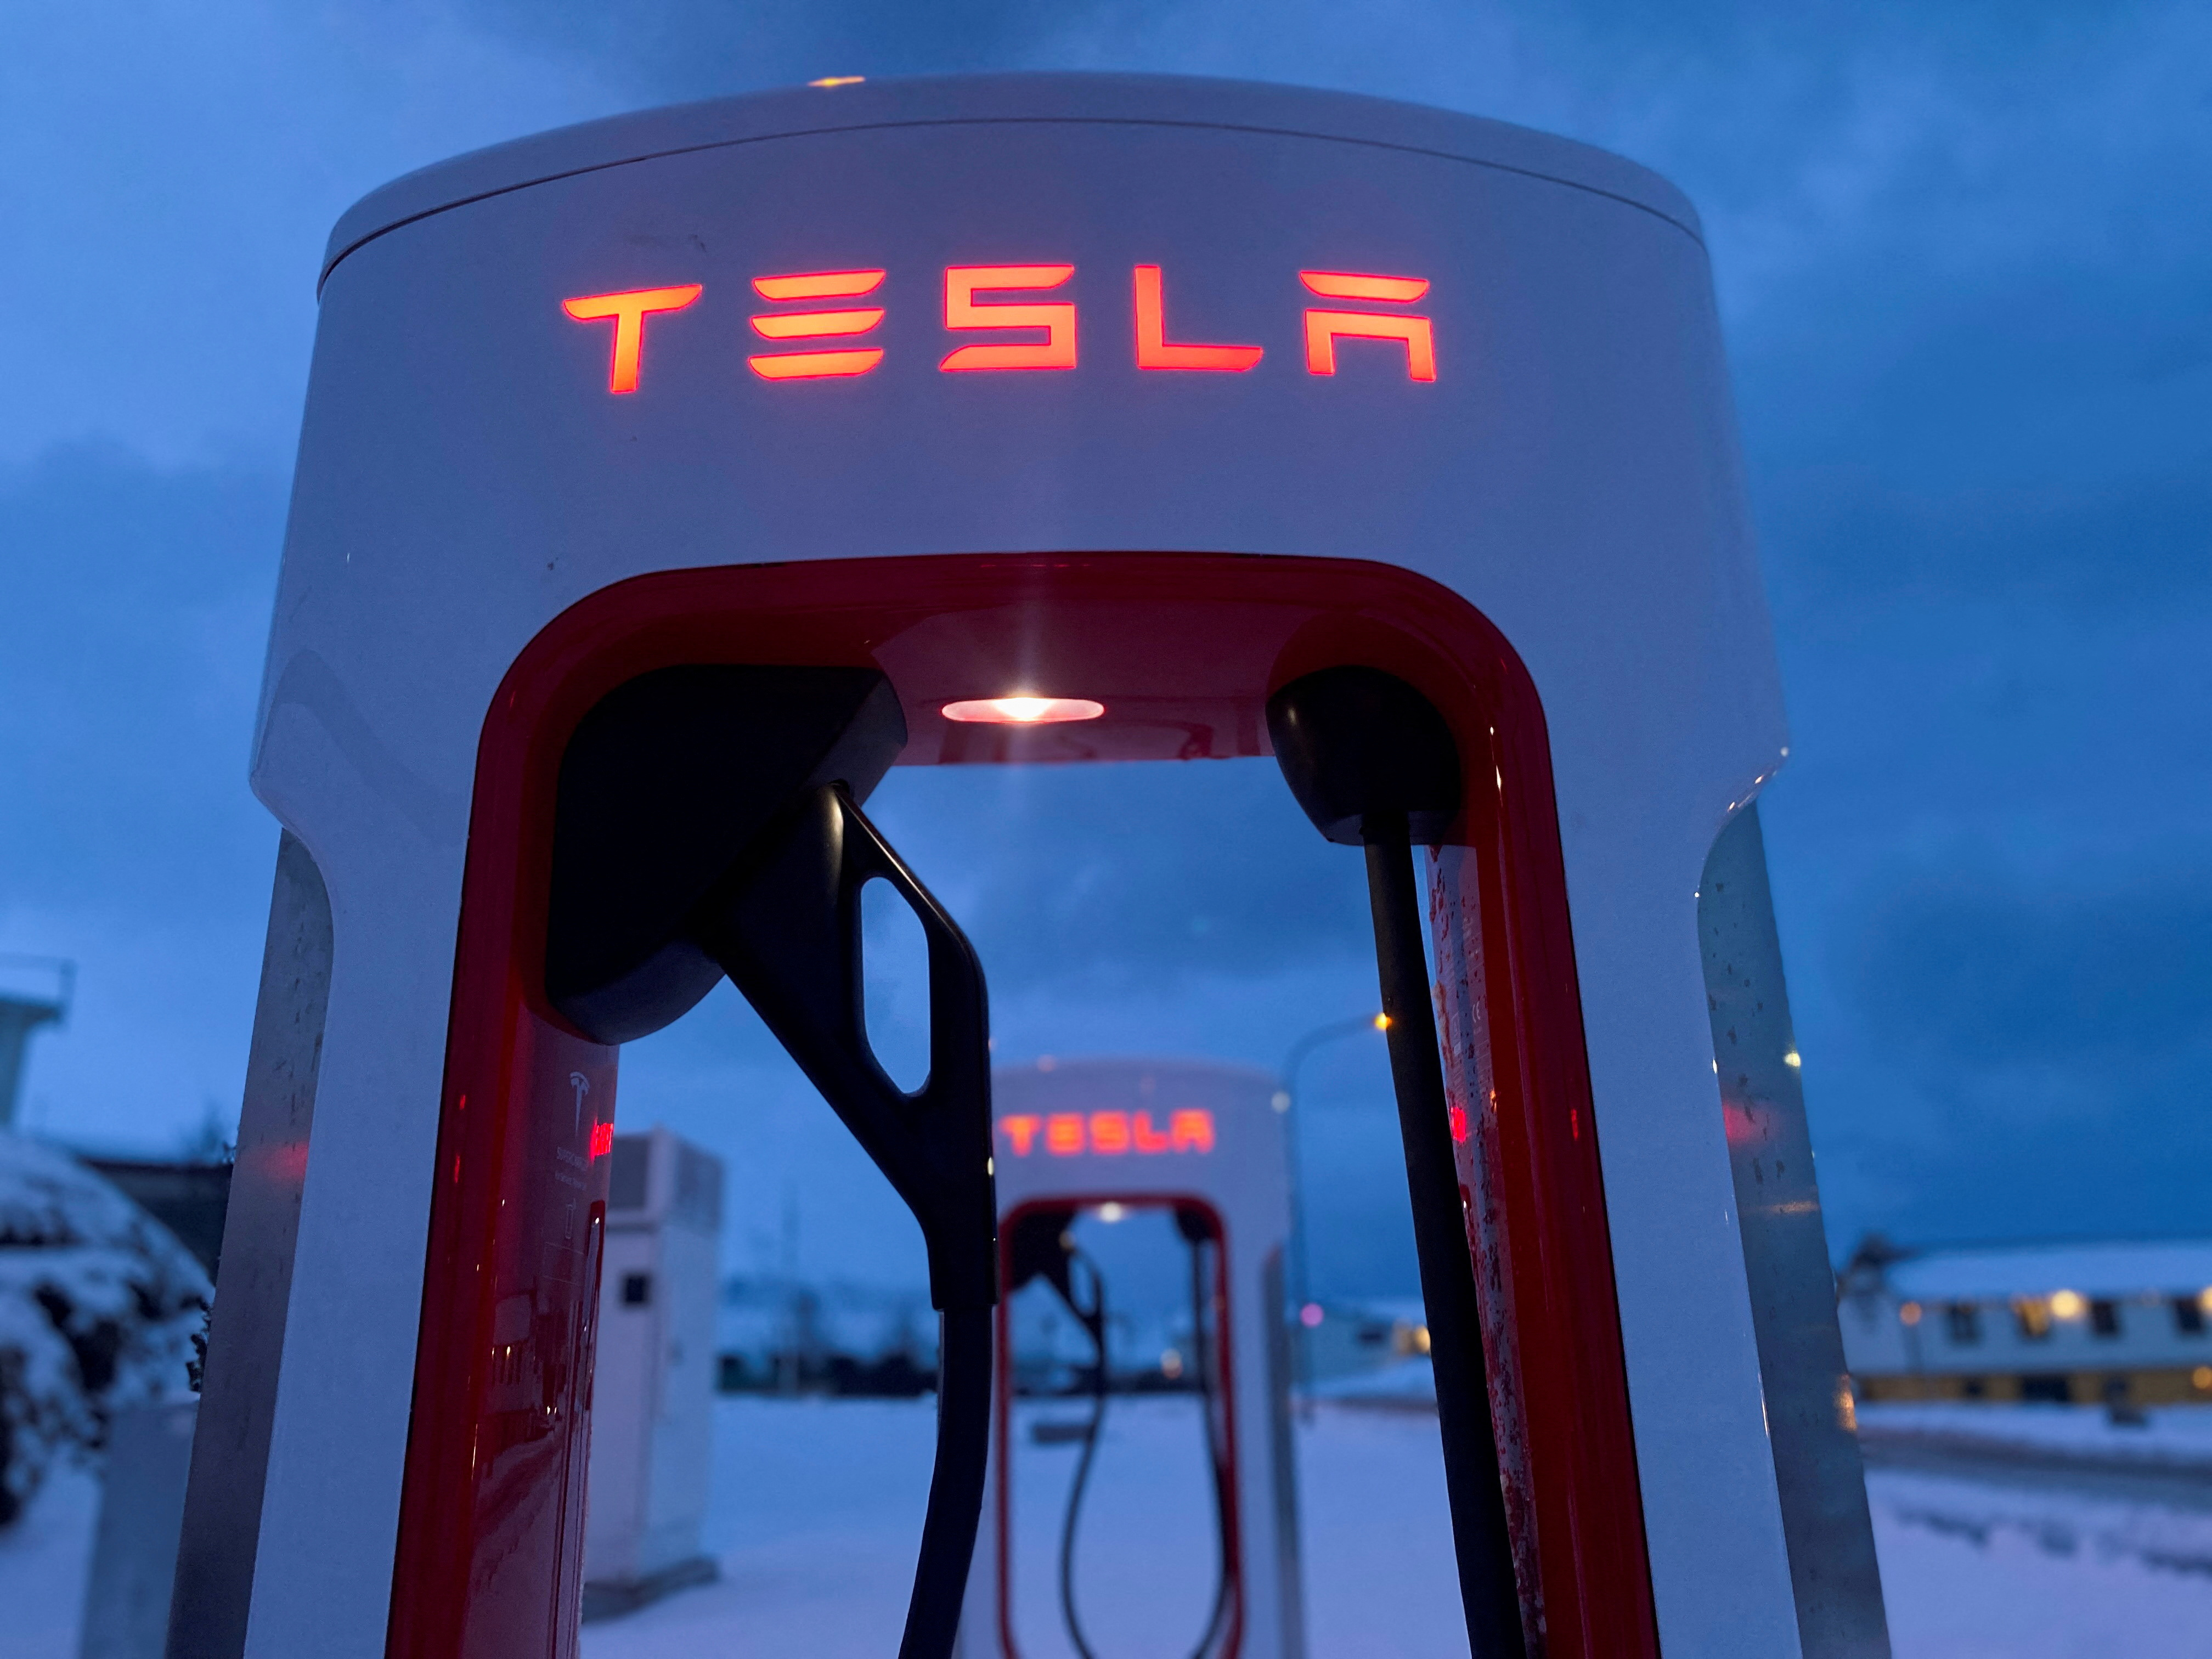 Tesla electric car chargers are seen in winter in Höfn, Iceland, February 16, 2022.  REUTERS/Nacho Doce/File